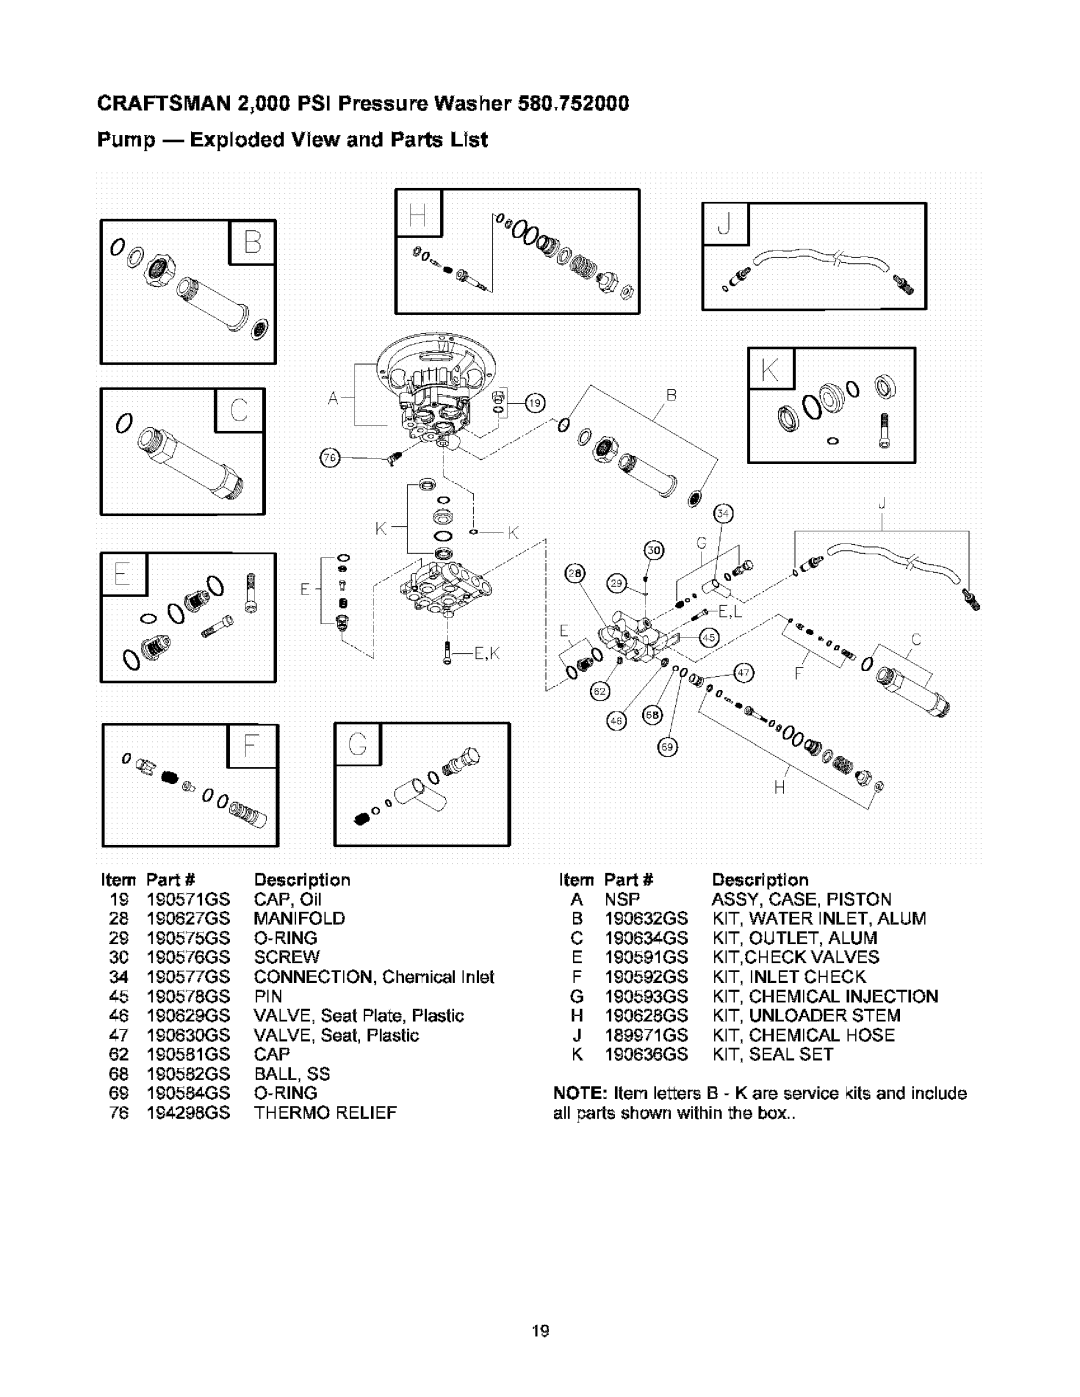 Craftsman 580.752 owner manual E,L, CRAFTSMAN 2,000 PSI Pressure Washer, Pump -- Exploded View and Parts List 